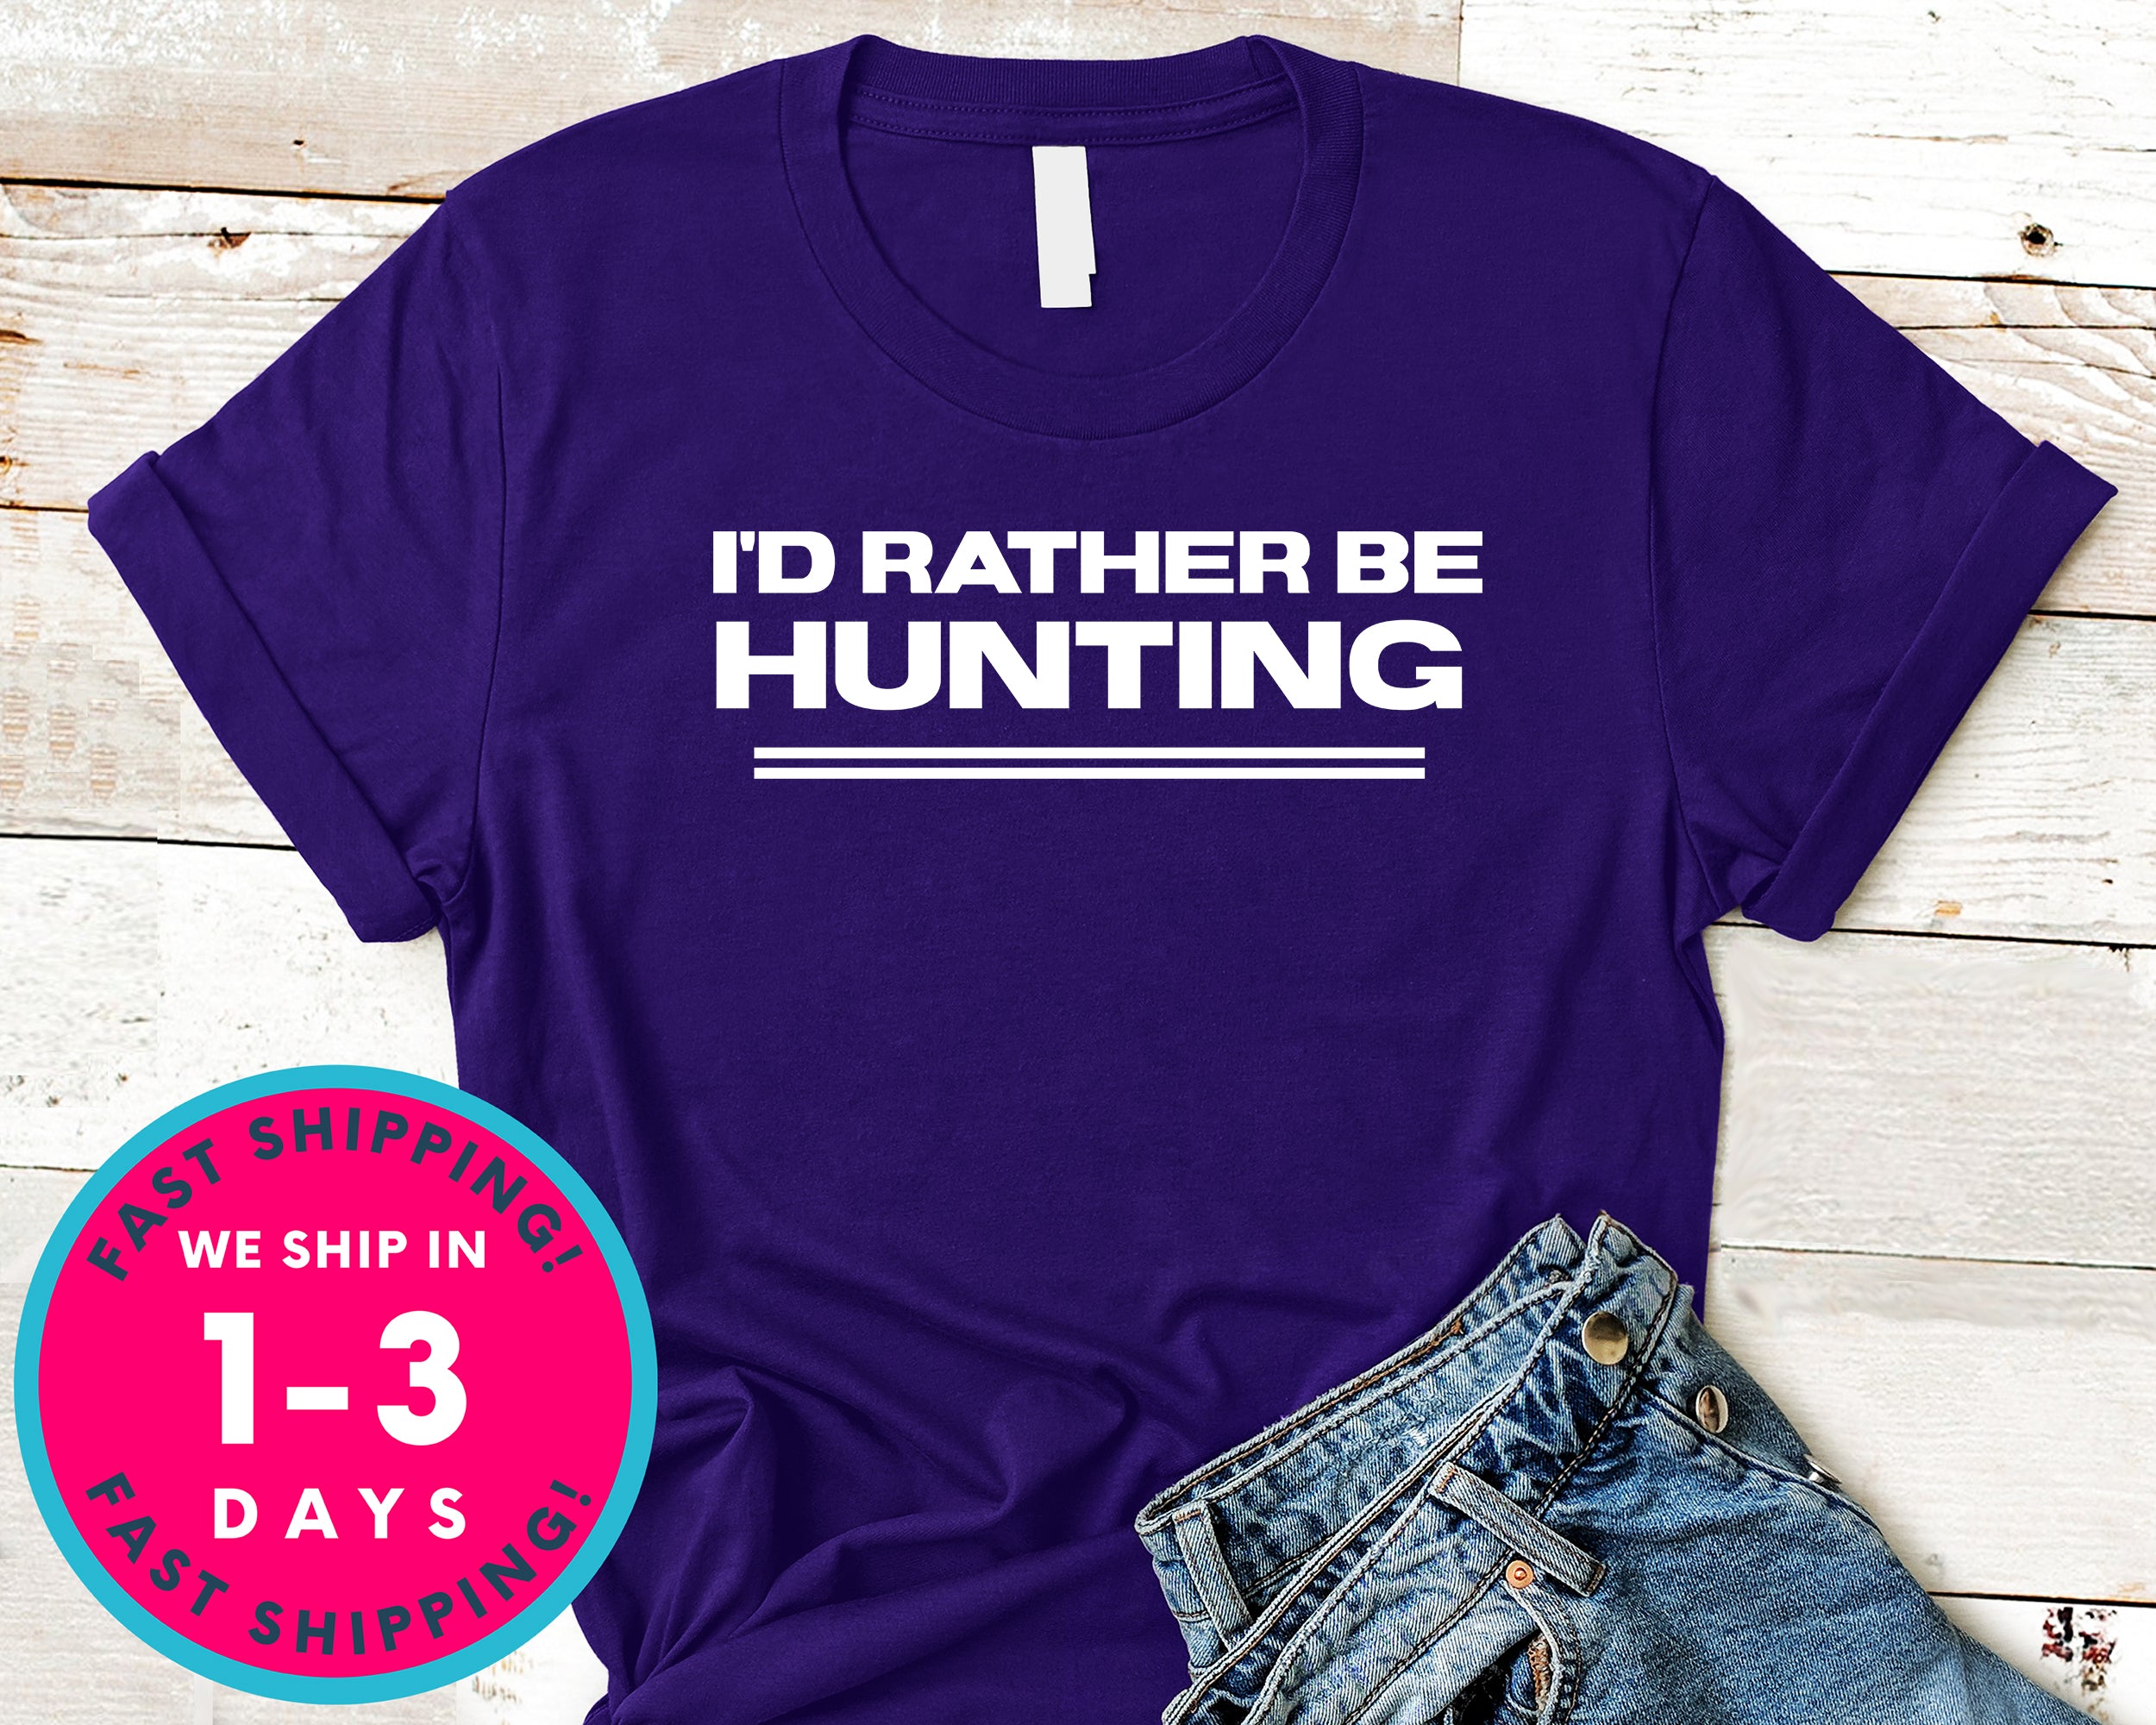 I'd Rather Be Hunting T-Shirt - Outdoor Shirt